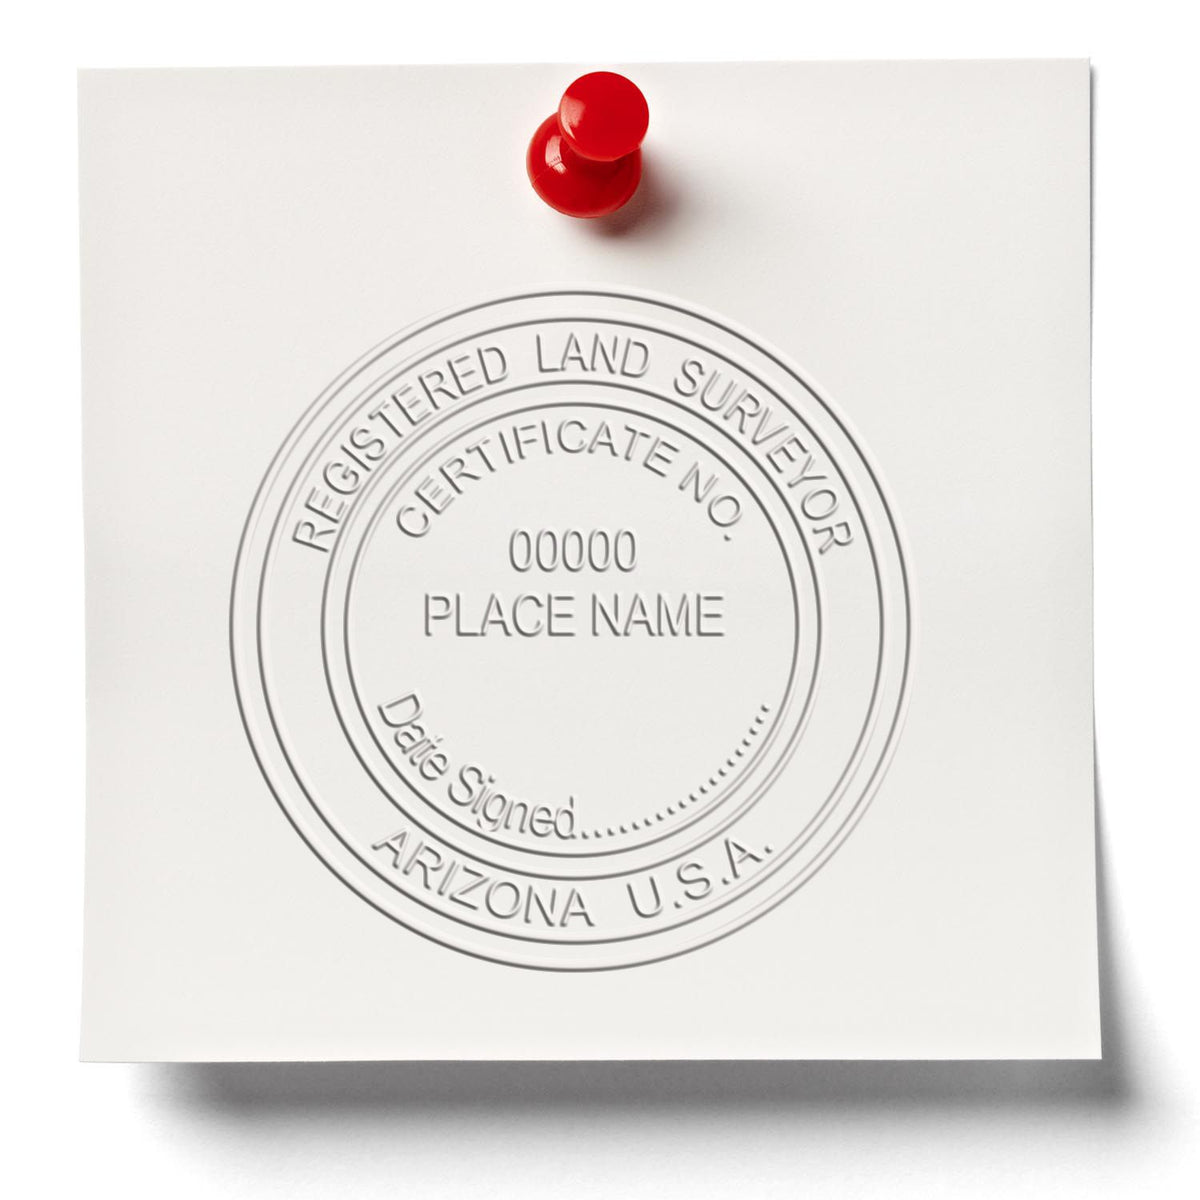 The Gift Arizona Land Surveyor Seal stamp impression comes to life with a crisp, detailed image stamped on paper - showcasing true professional quality.